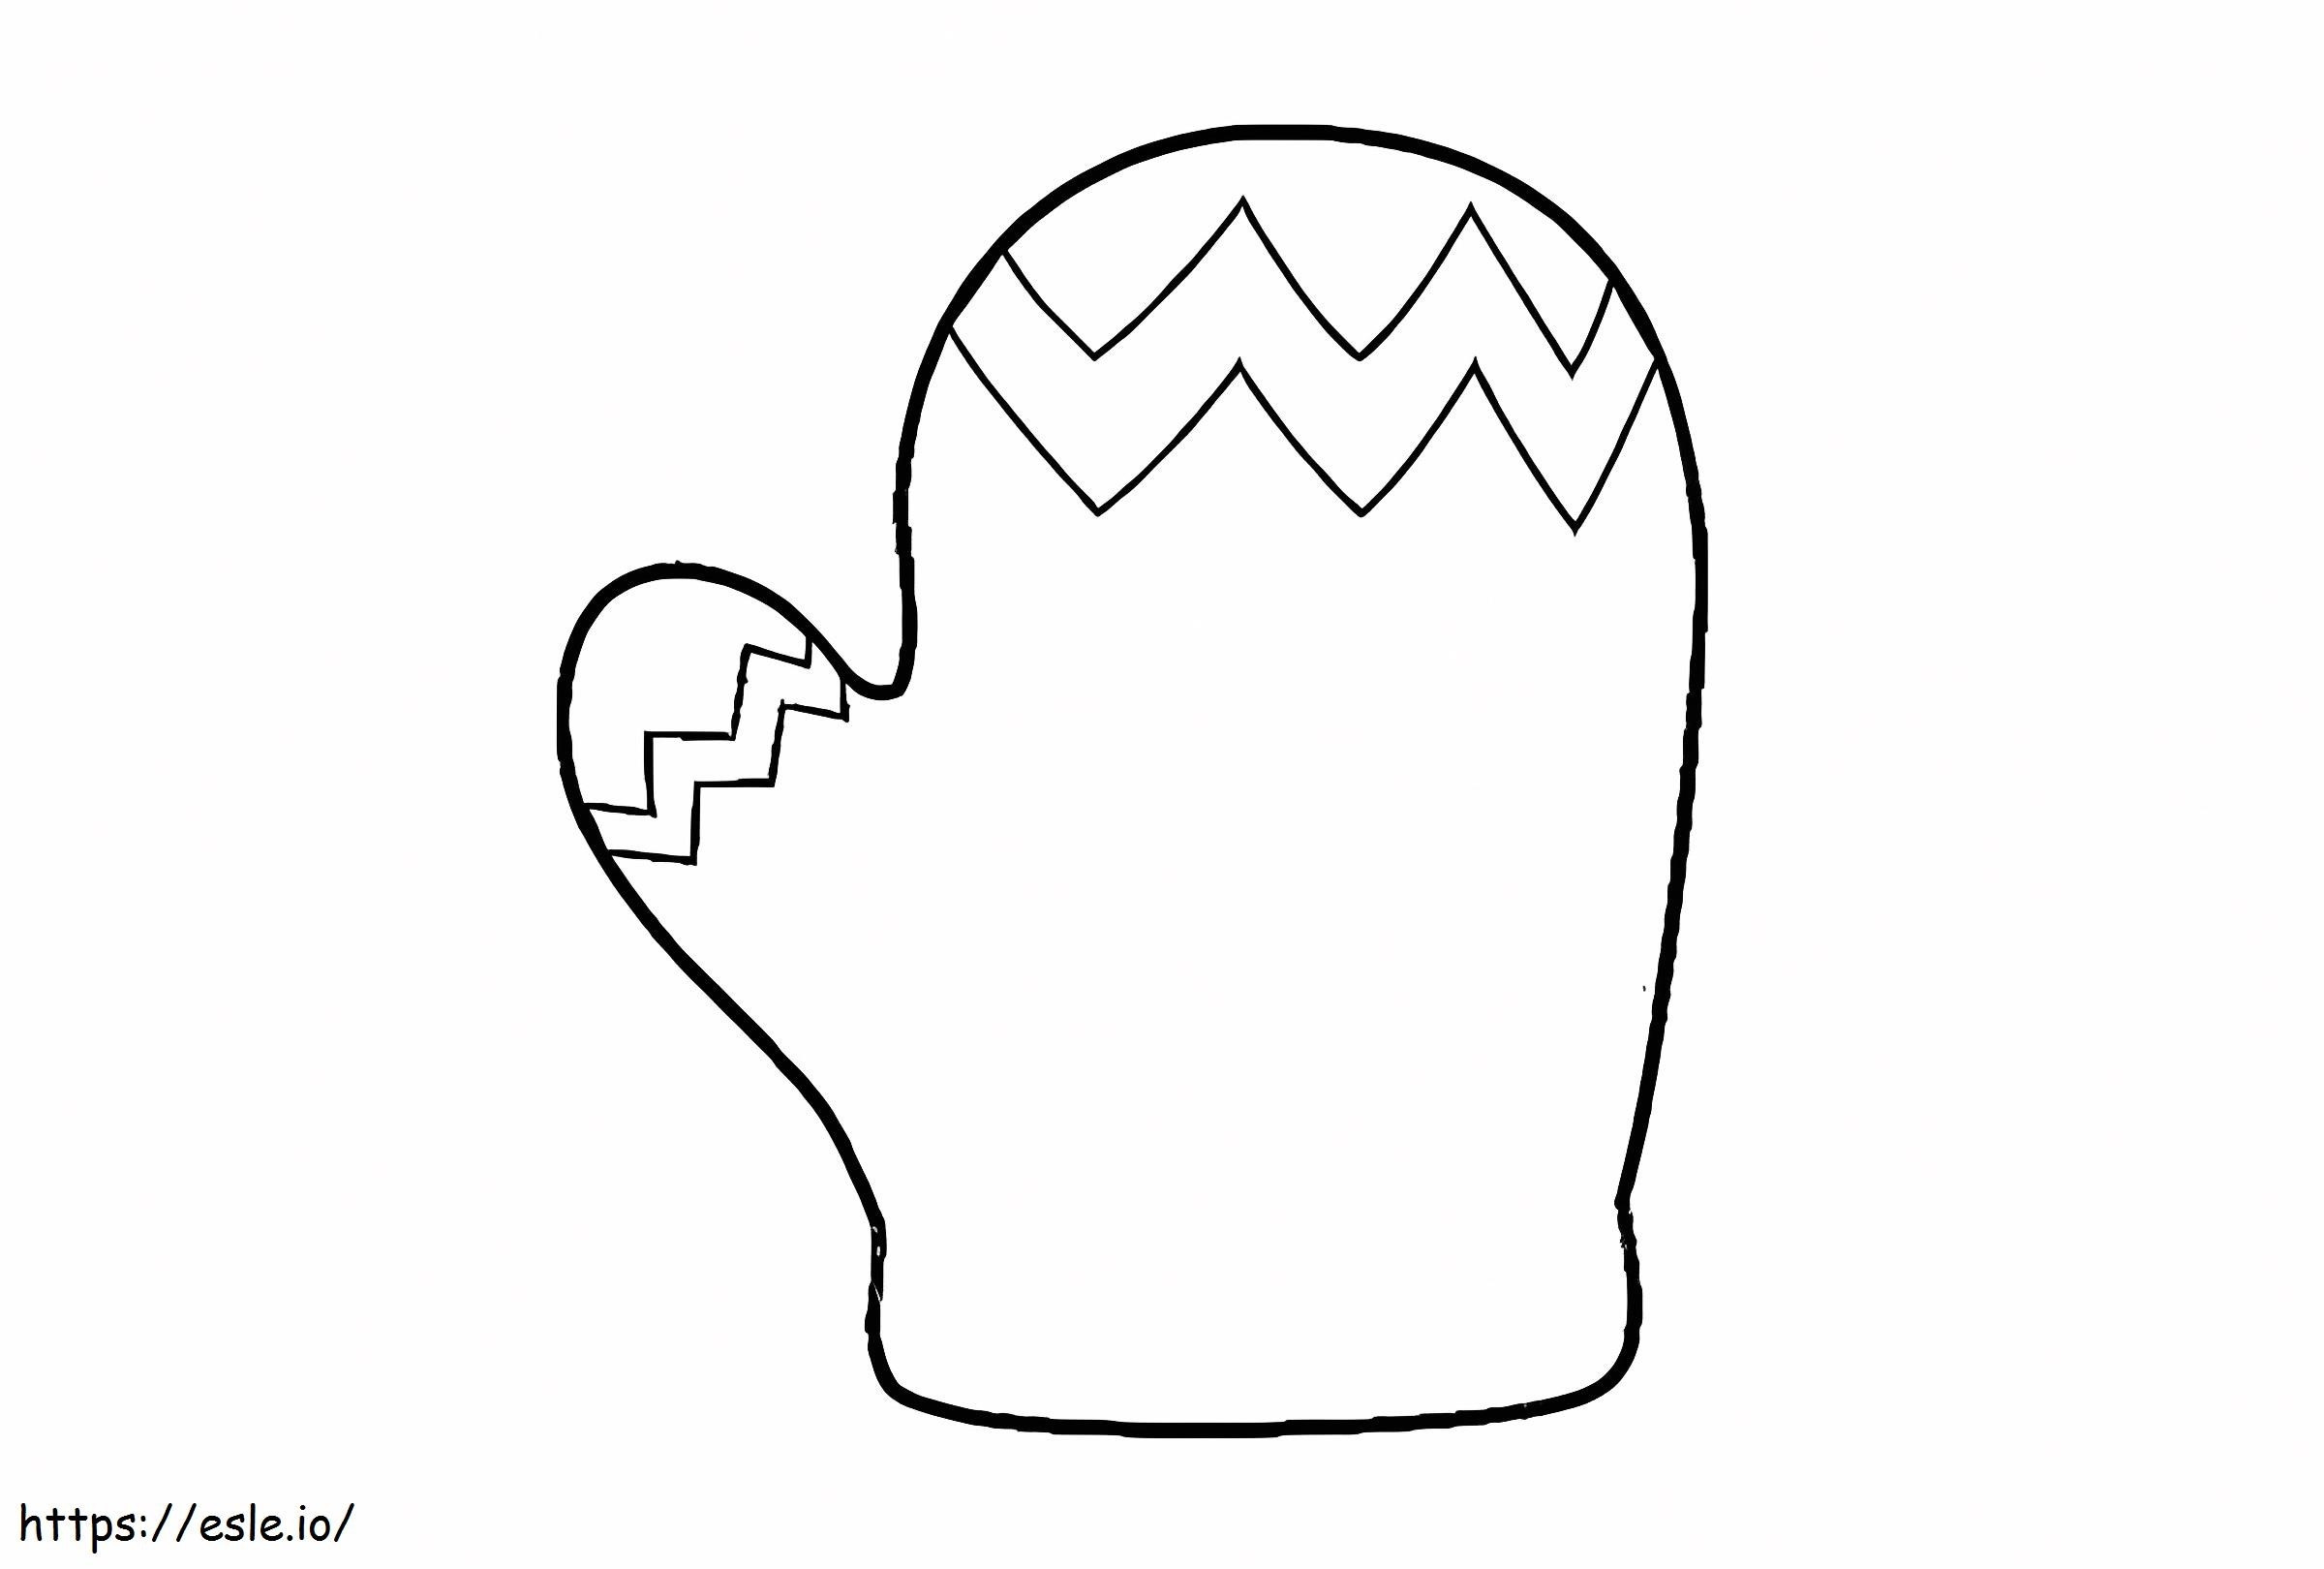 Printable Mitten coloring page